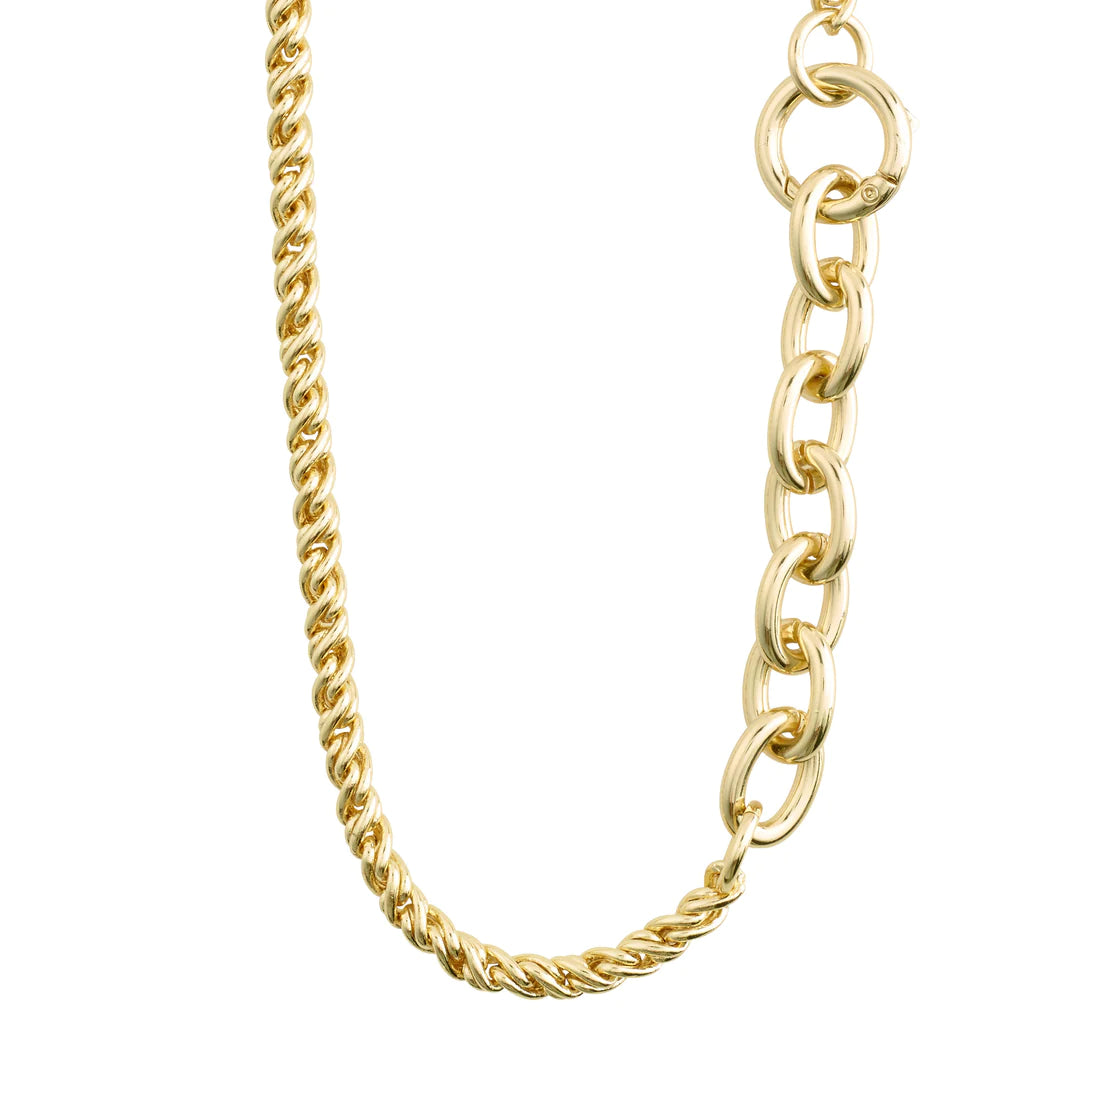 PILGRIM LEARN RECYCLED BRAIDED-CHAIN NECKLACE GOLD